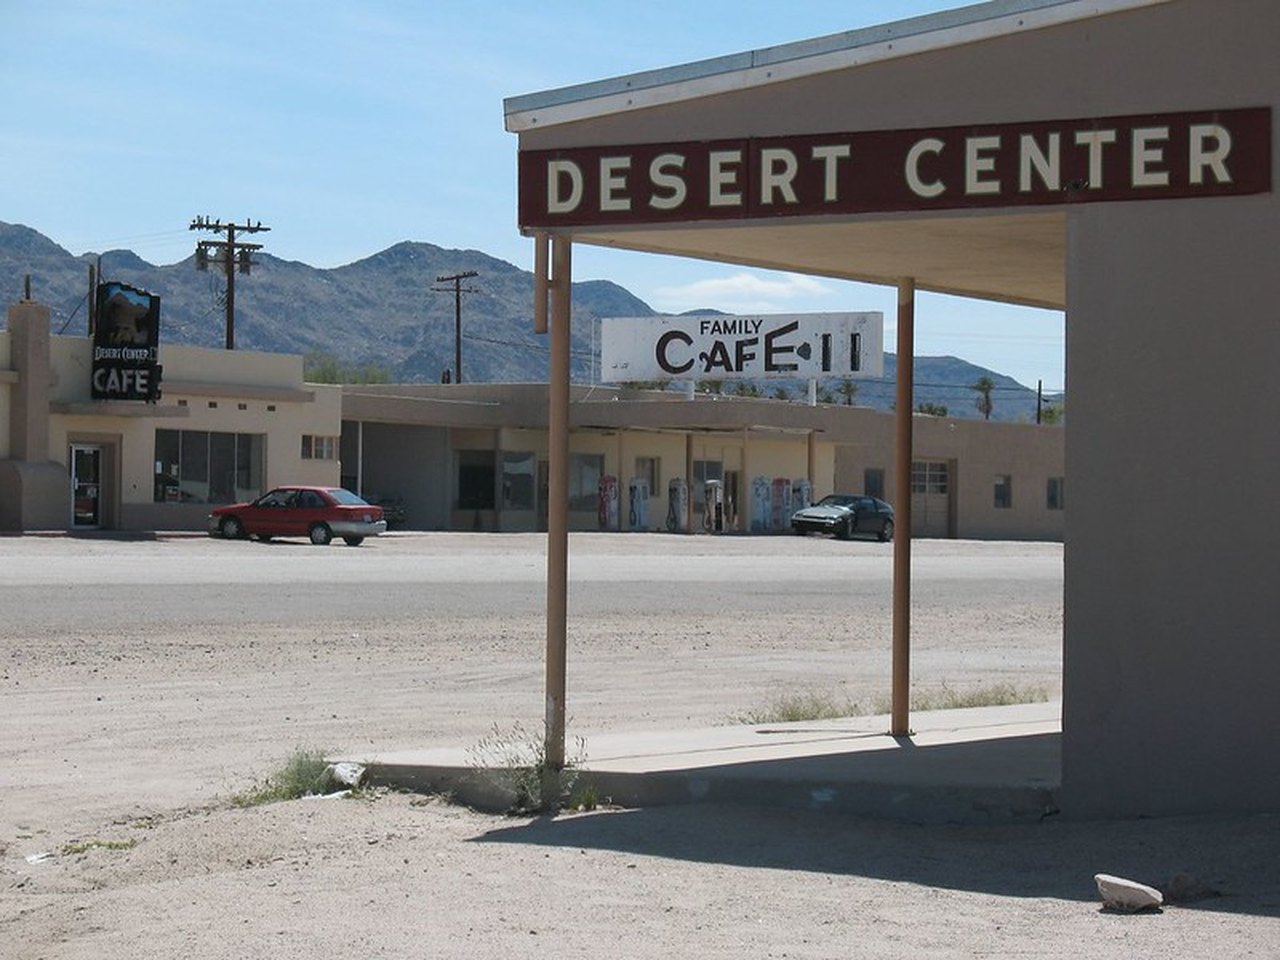 Most People Have Long Forgotten About This Vacant Ghost Town In Southern California's Desert